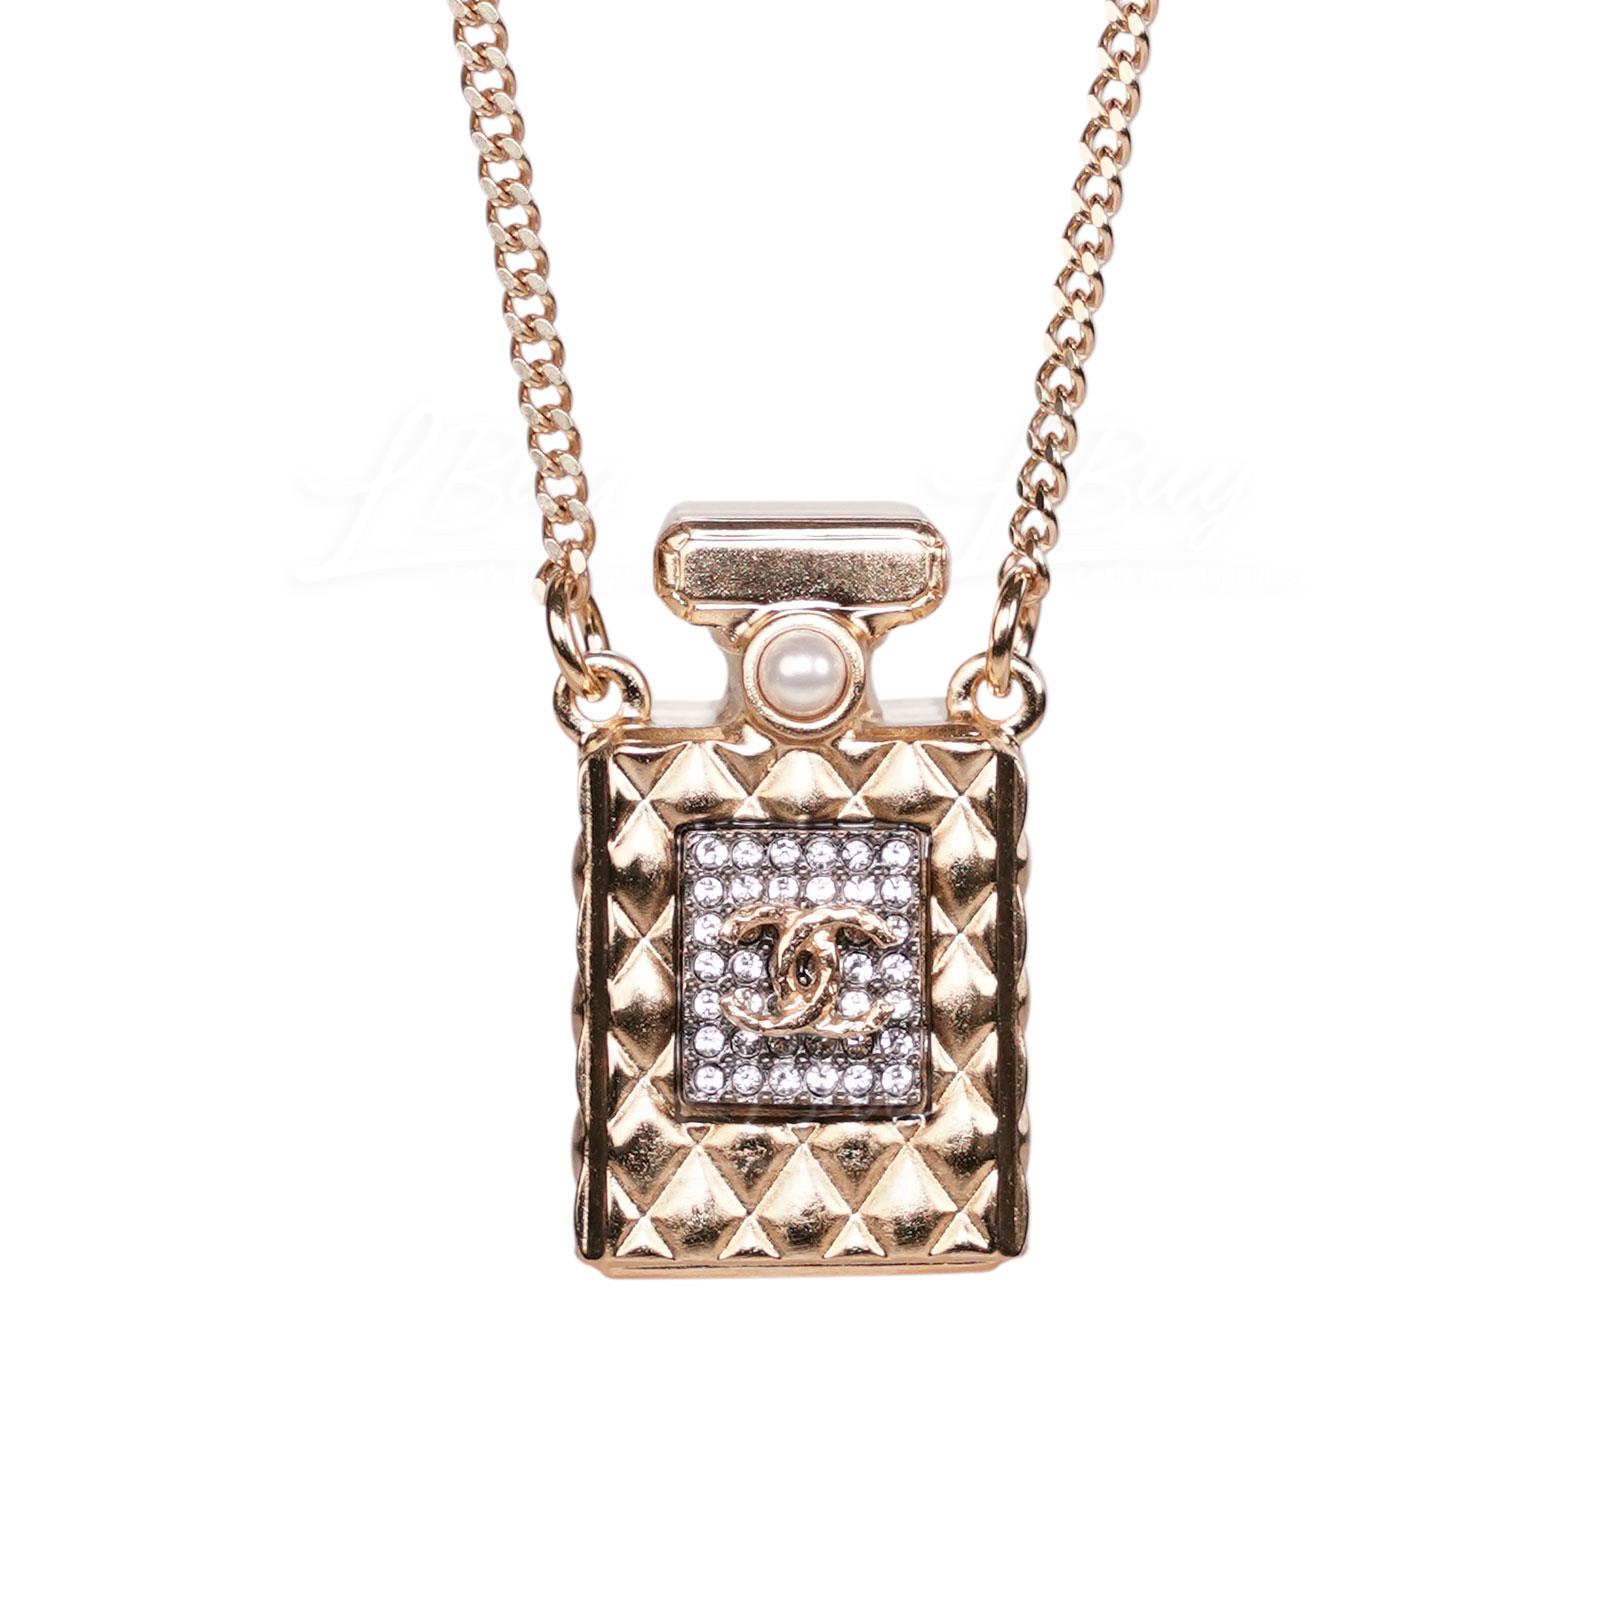 Chanel Perfume Bottle Necklace Gold AB4392